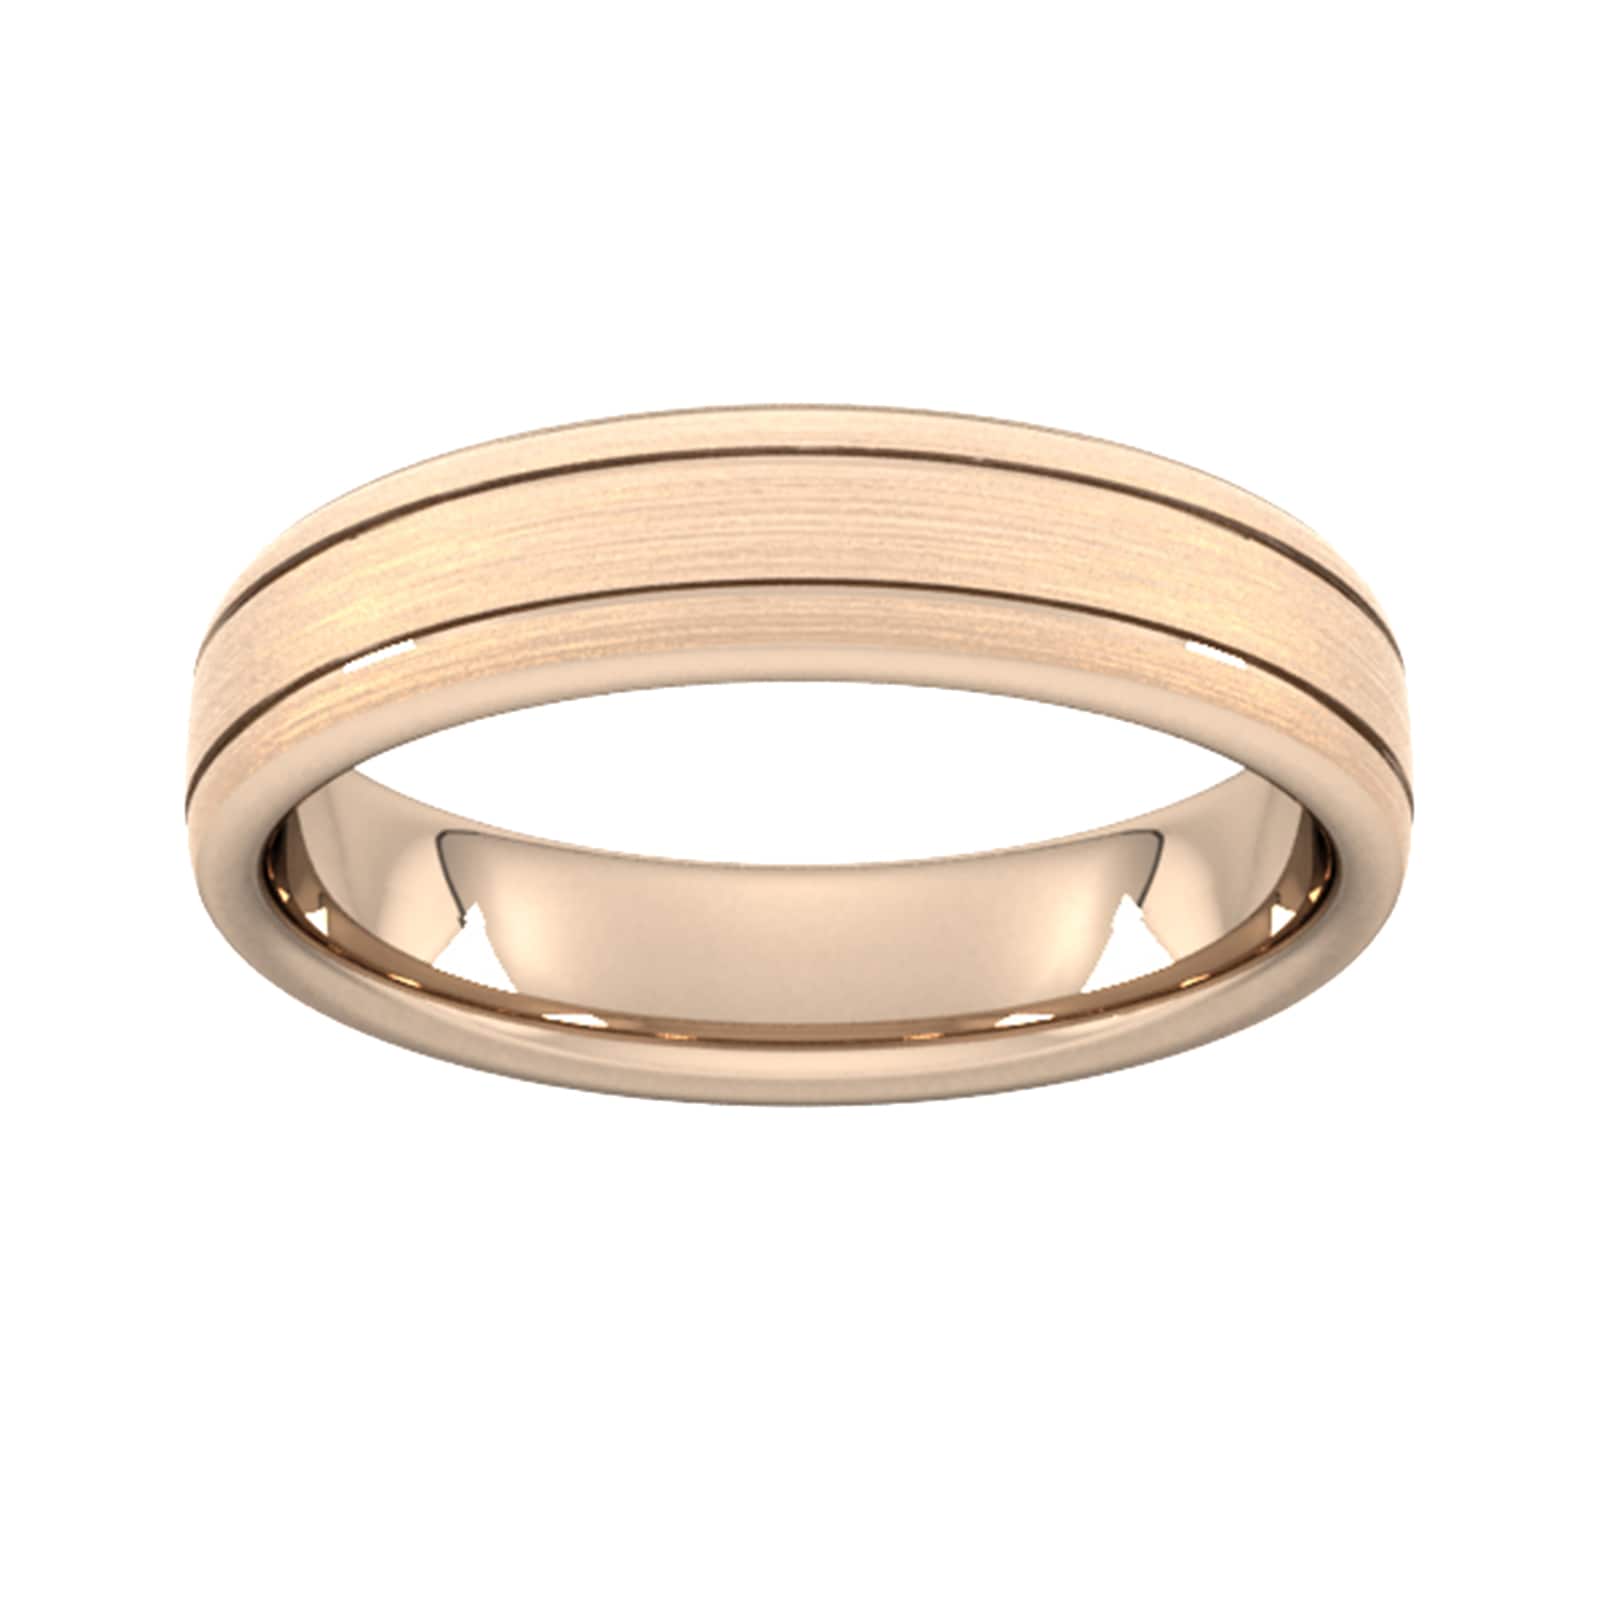 5mm Slight Court Heavy Matt Finish With Double Grooves Wedding Ring In 9 Carat Rose Gold - Ring Size V